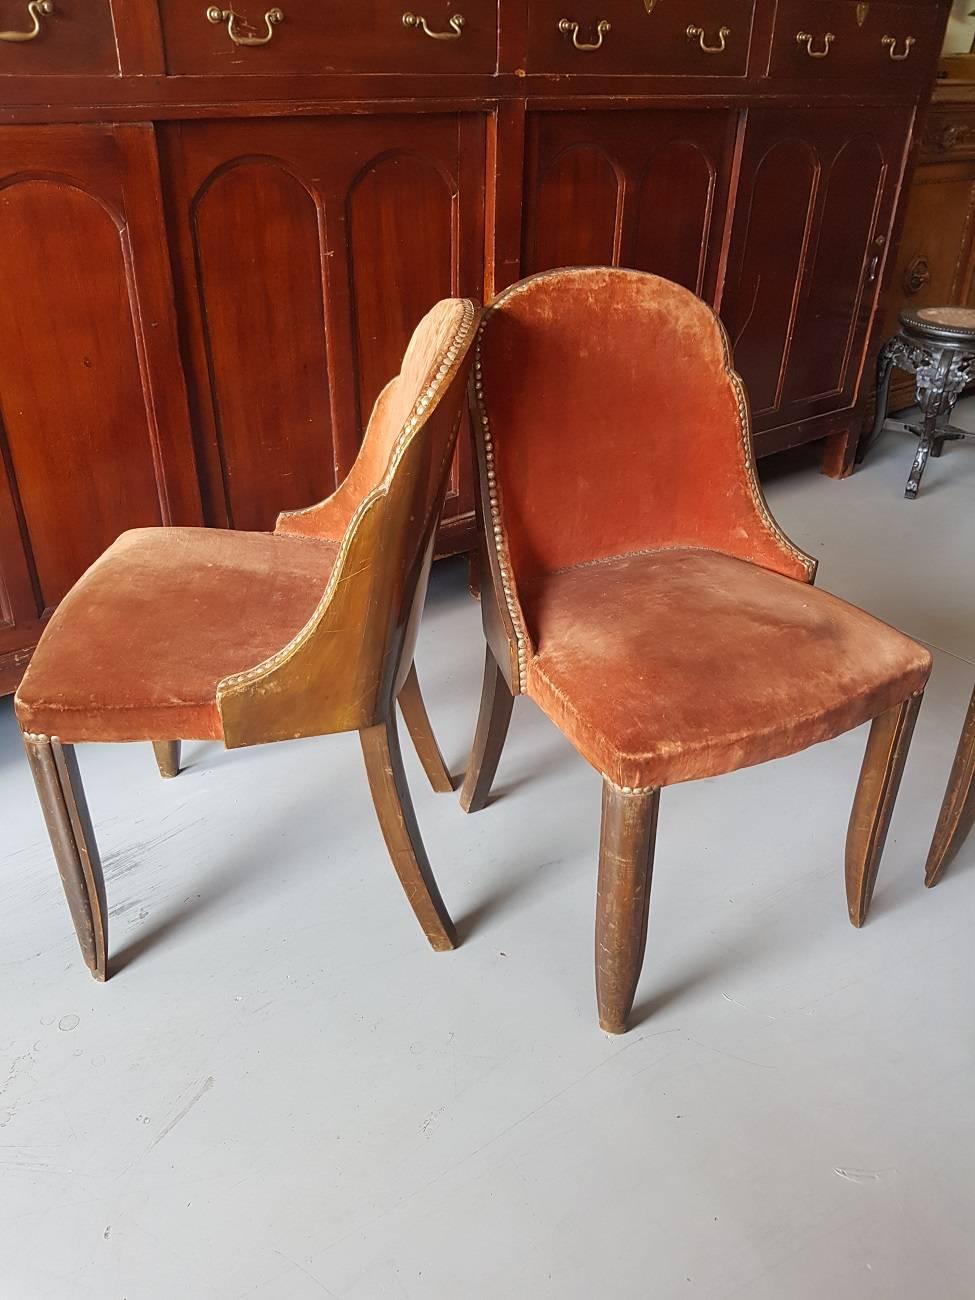 20th Century Unrestored French Art Deco Dining Chairs from 1920-1930